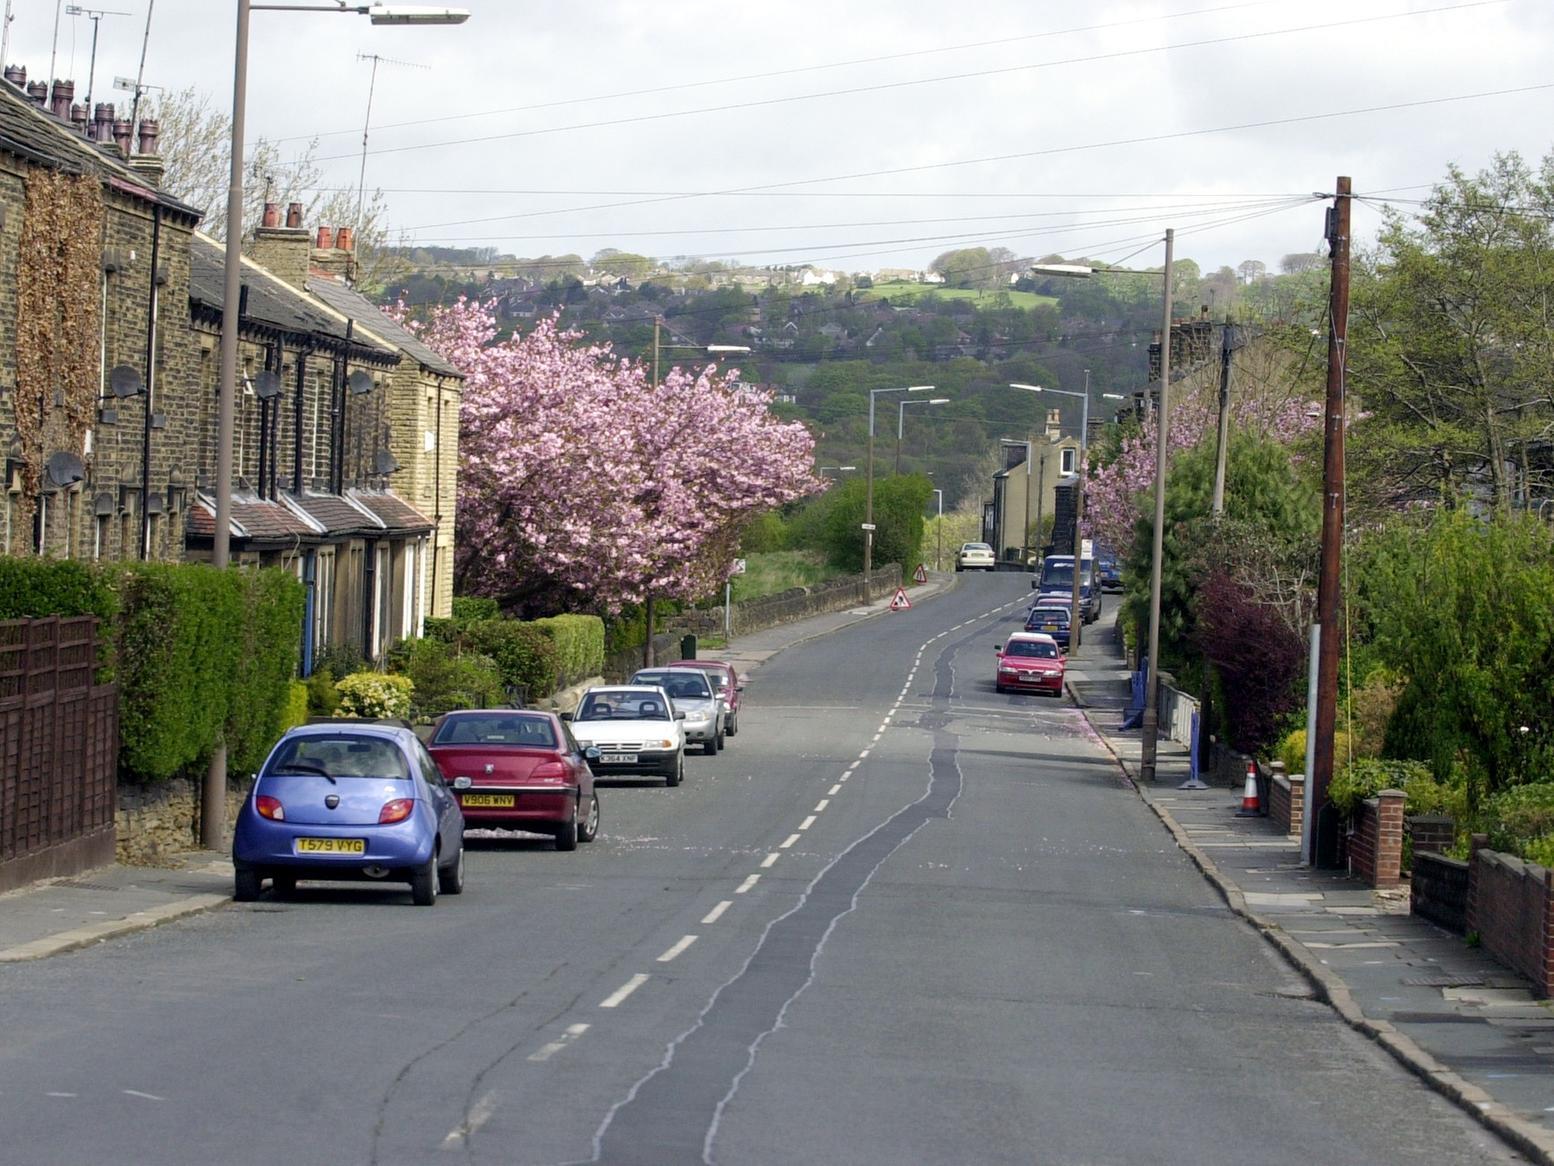 Recognise this view and road? Rodley's Bagley Lane was named as one of the noisiest roads in the UK.